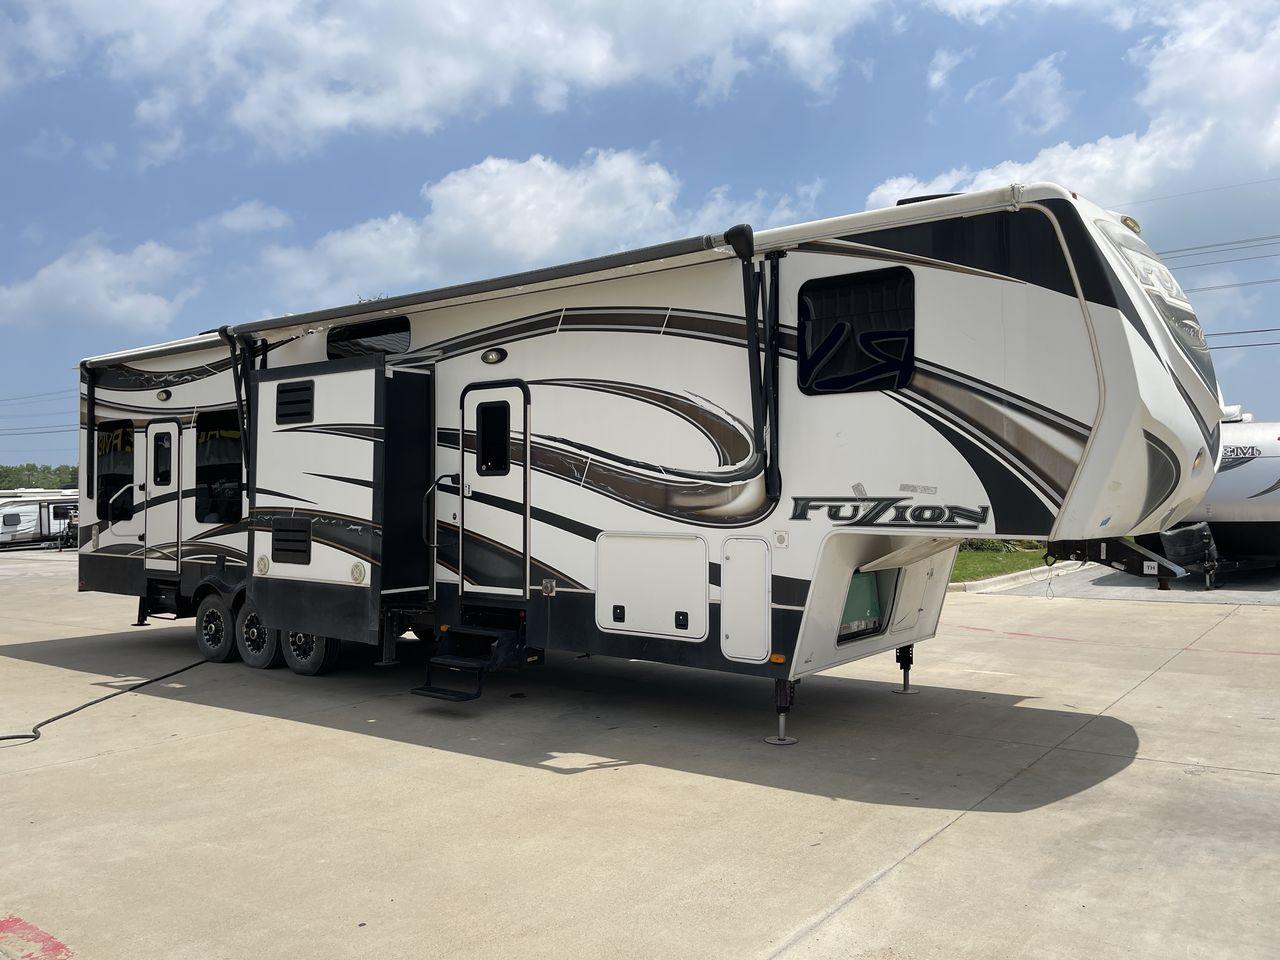 2014 WHITE KEYSTONE FUZION M-399 (4YDF39939EF) , Length: 41 ft. | Dry Weight: 14,100 lbs. | Gross Weight: 18,000 lbs. | Slides: 3 transmission, located at 4319 N Main Street, Cleburne, TX, 76033, (817) 221-0660, 32.435829, -97.384178 - The 2014 Keystone Fuzion M-399 offers exceptional value for its price. With its white exterior color, this RV stands out on the road and is sure to turn heads wherever you go. Measuring 41 ft. in length, this toy hauler provides ample space for you and your loved ones to relax and enjoy your travels - Photo #24